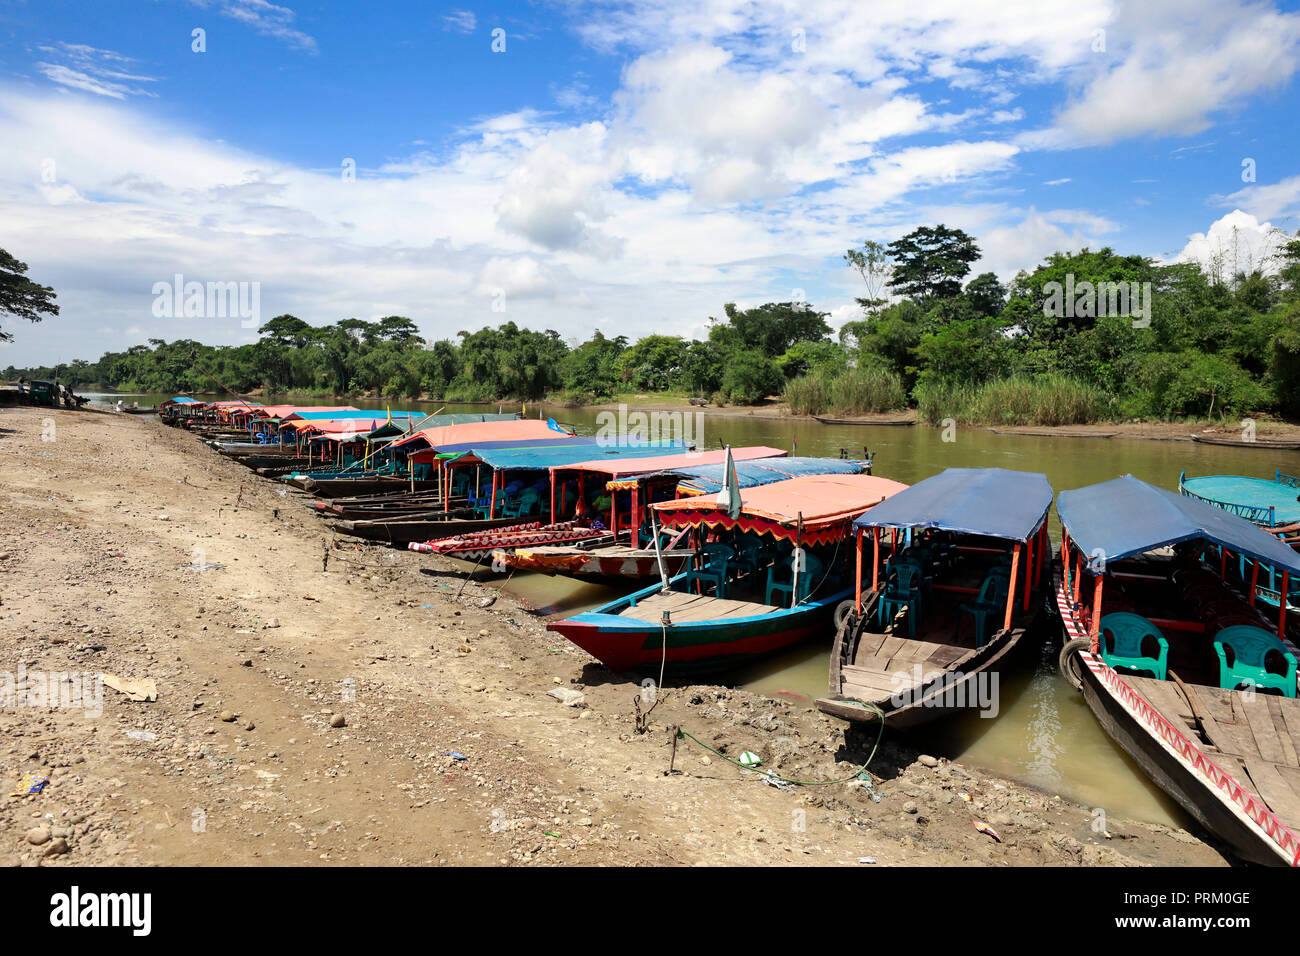 Sylhet, Bangladesh - September 22, 2018: Piyain River a trans-boundary river of India and Bangladesh. It is a tributary of the Surma River, which is o Stock Photo